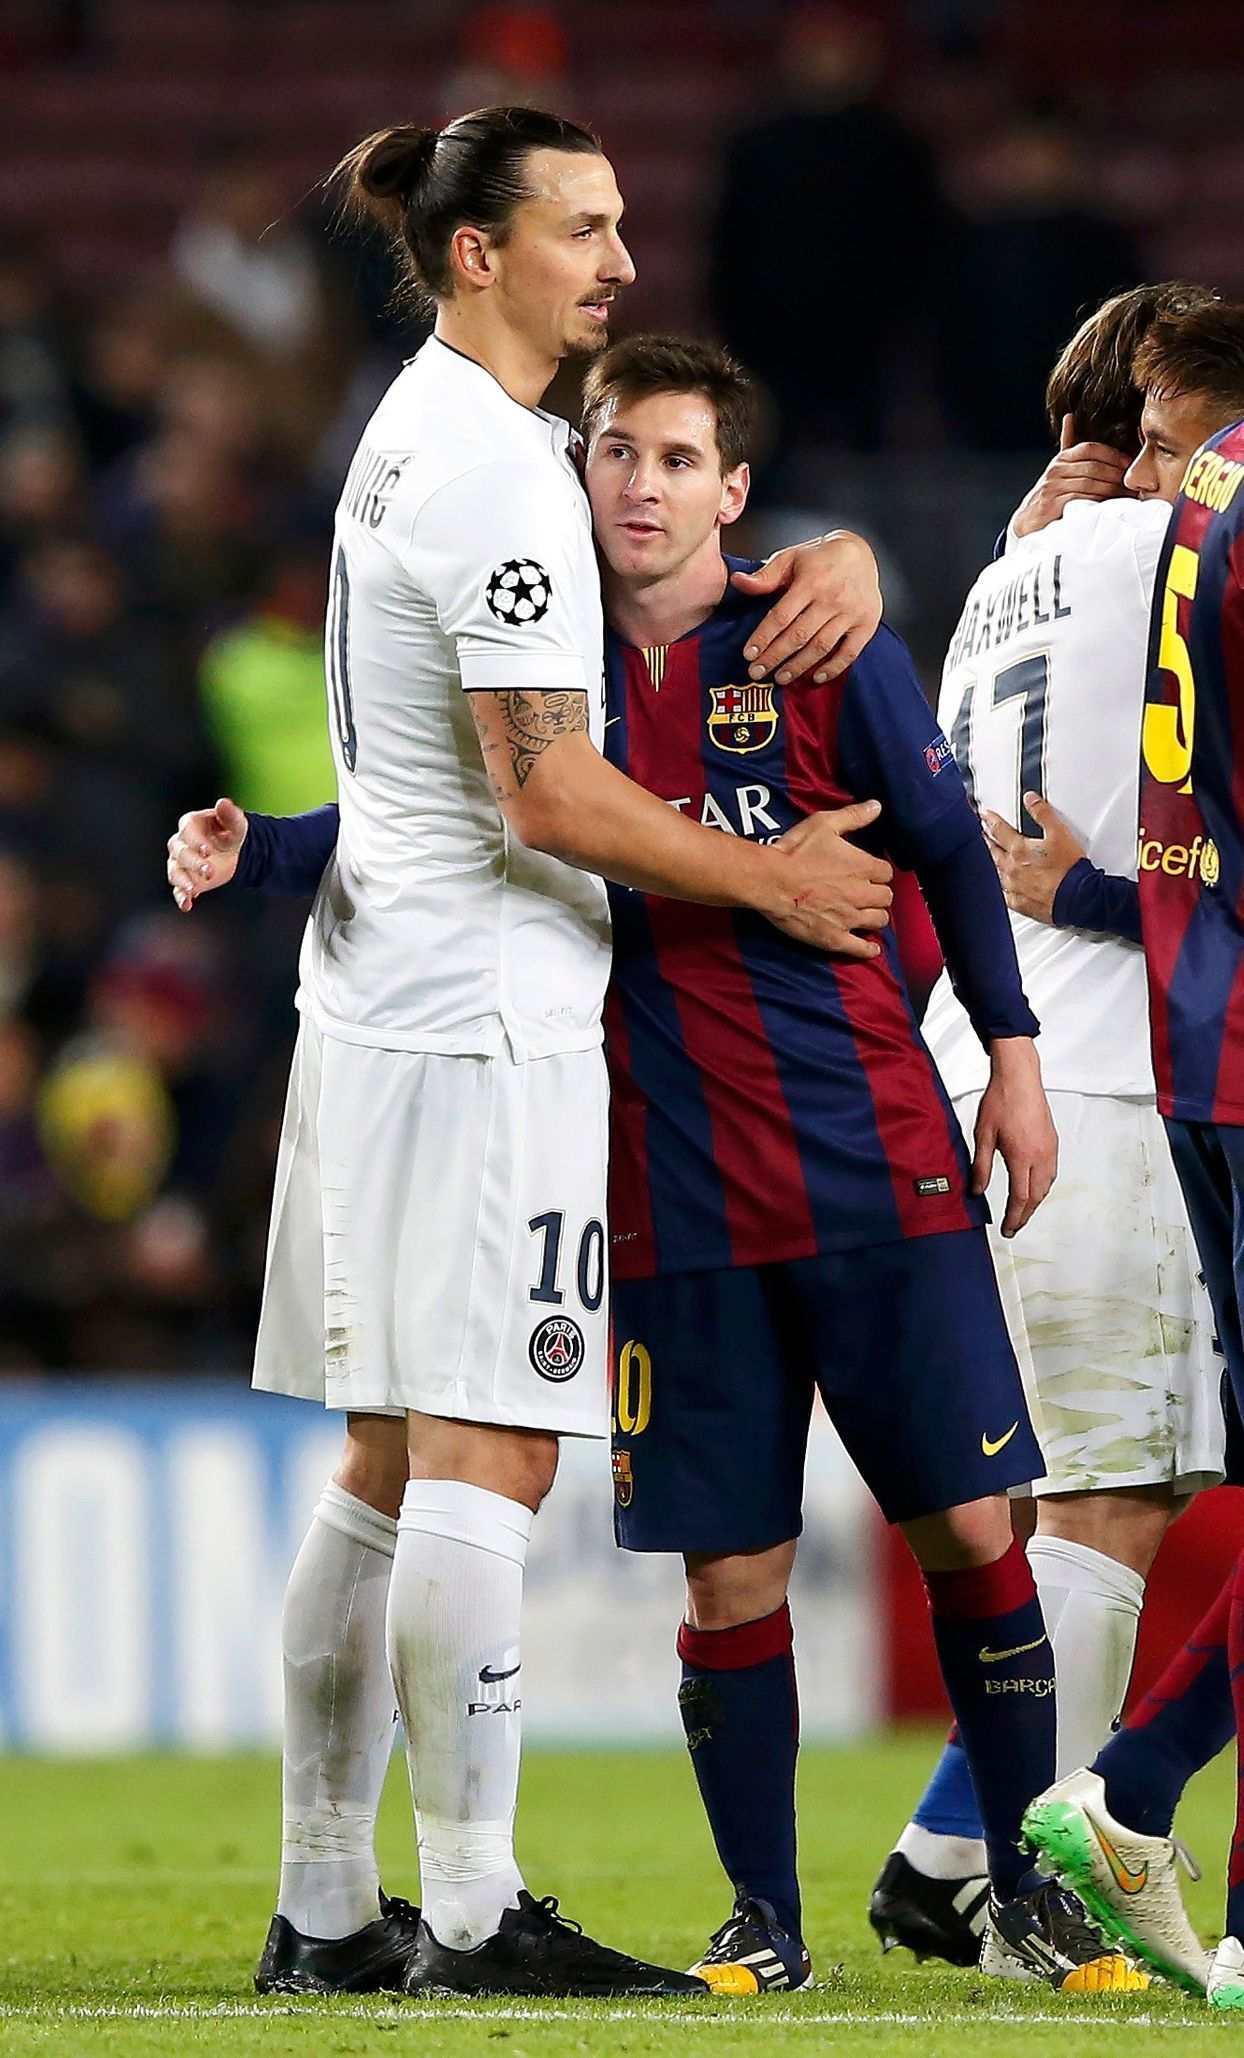 Paris St Germain's Zlatan Ibrahimovic embraces Barcelona's Lionel Messi after their Champions League Group F soccer match at the Nou Camp stadium in Barcelona